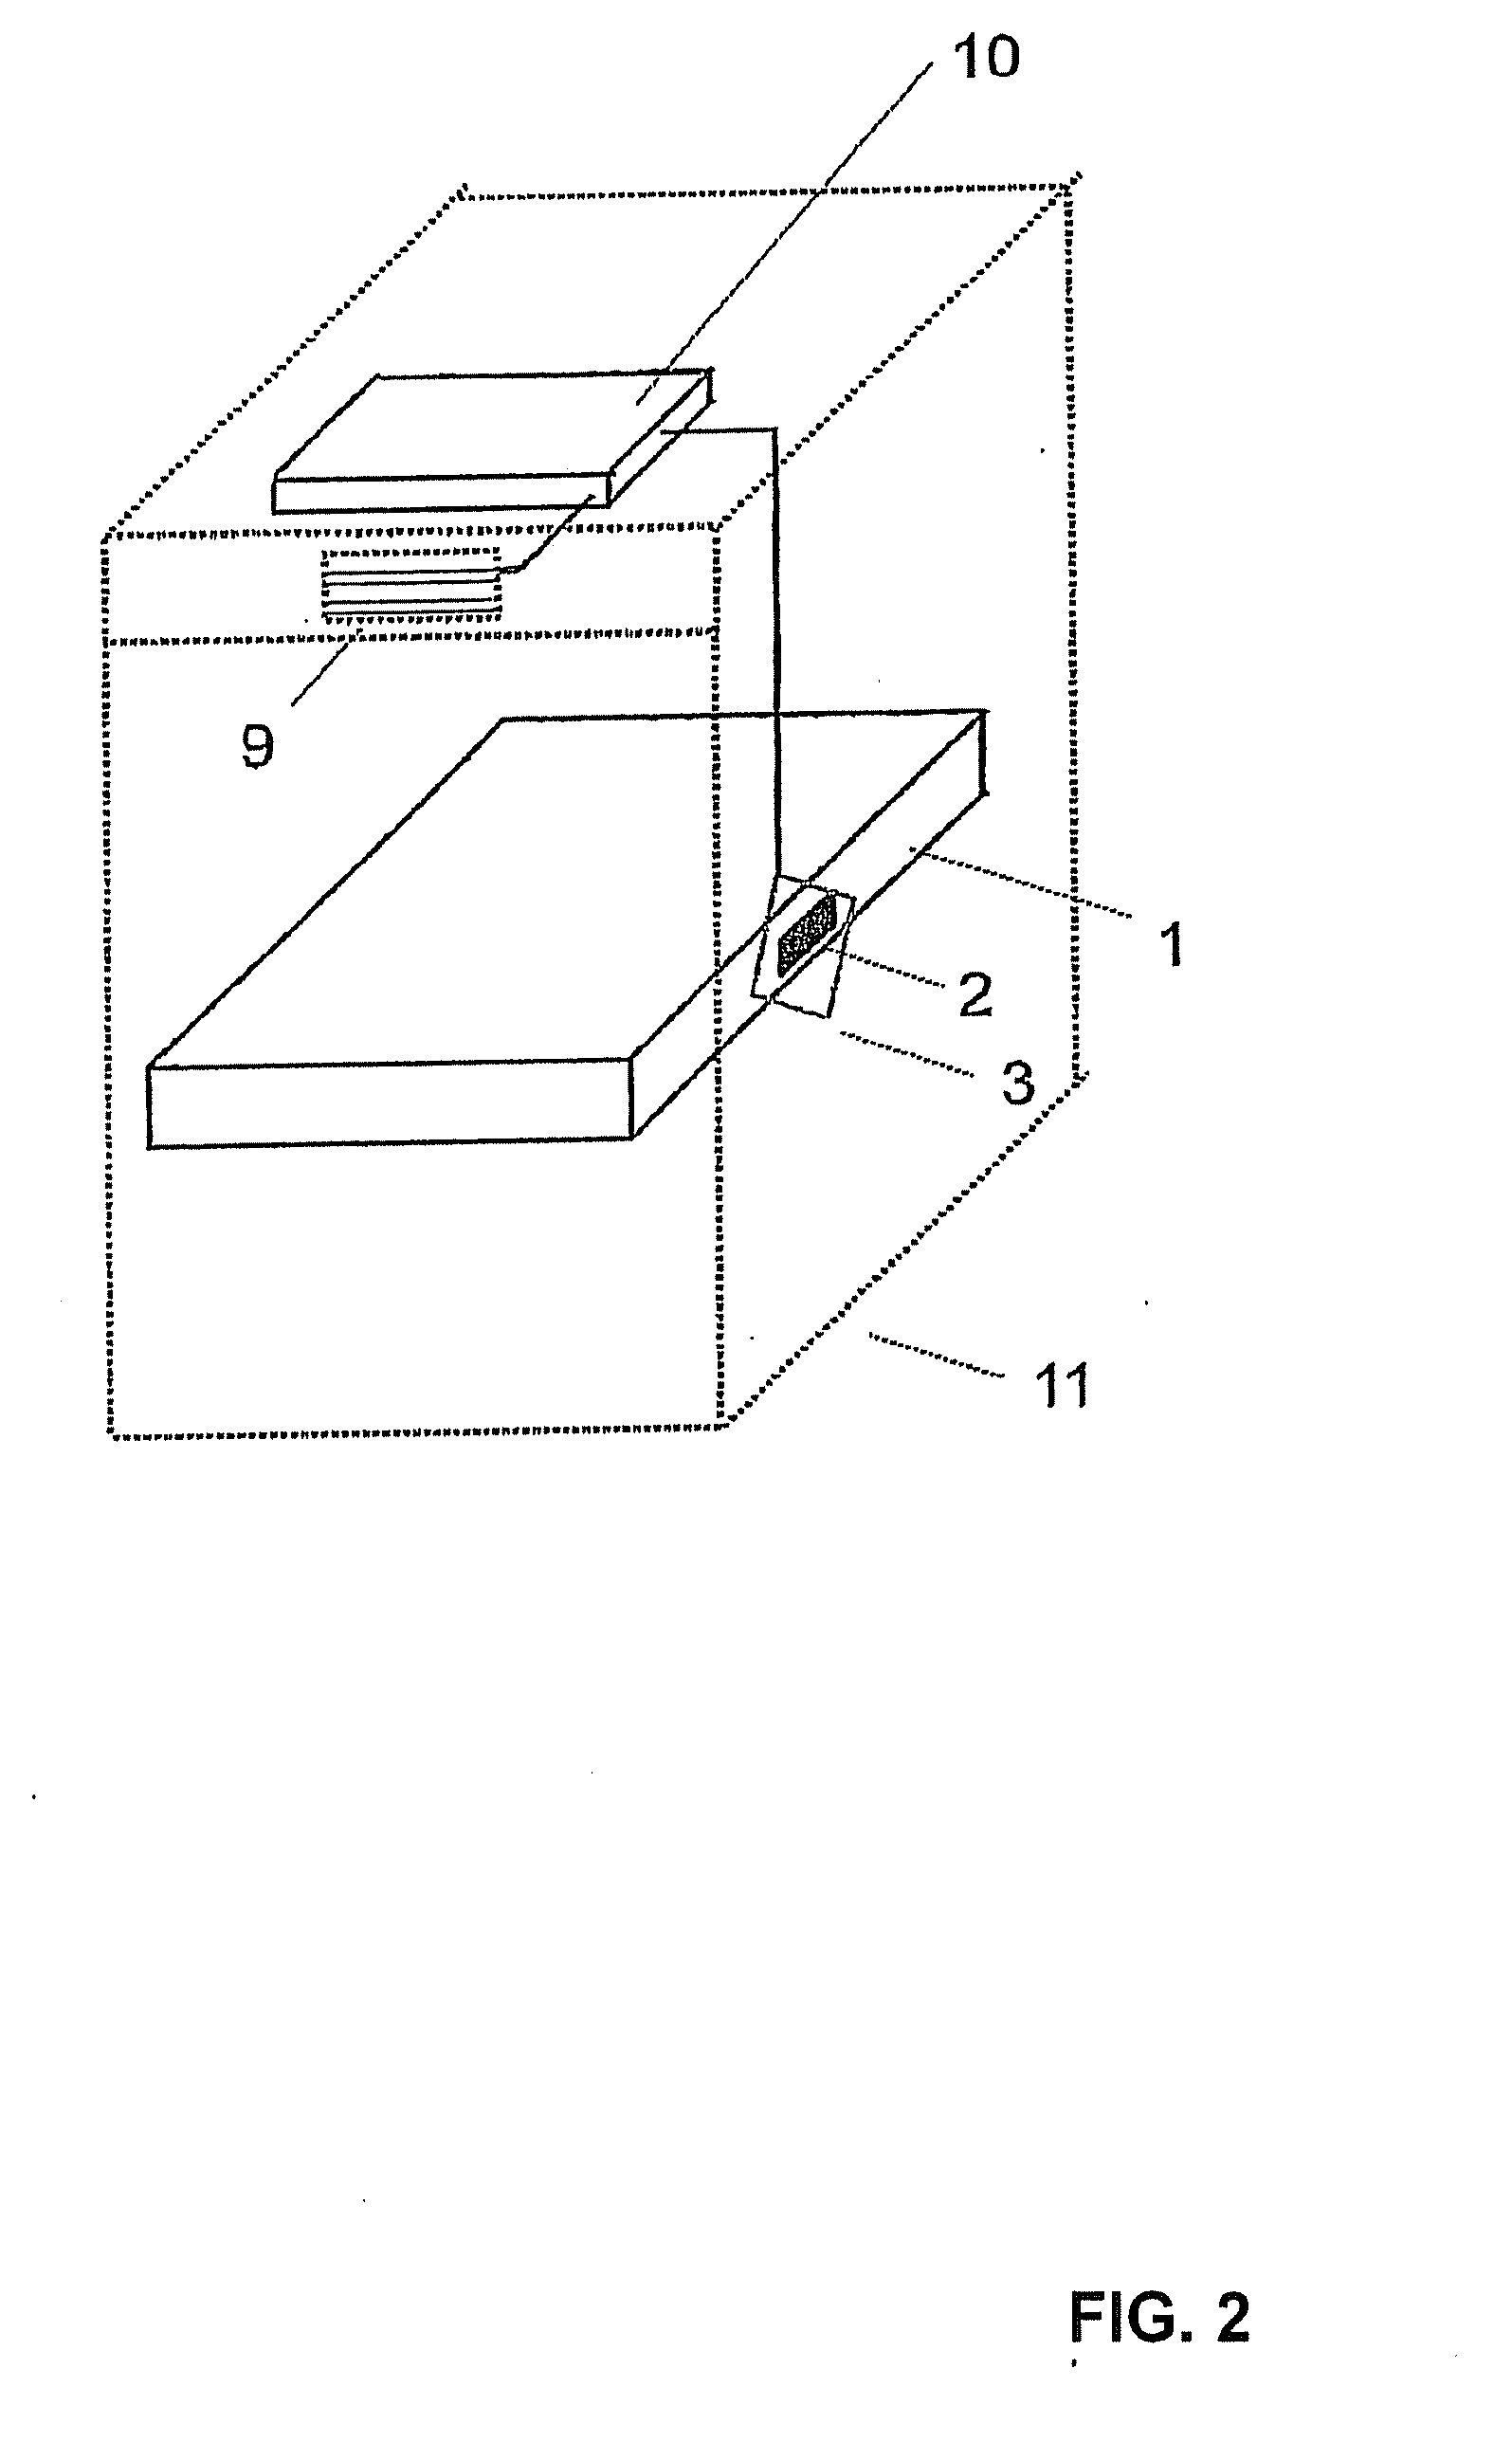 System and Method For Monitoring Manufactured Pre-Prepared Meals